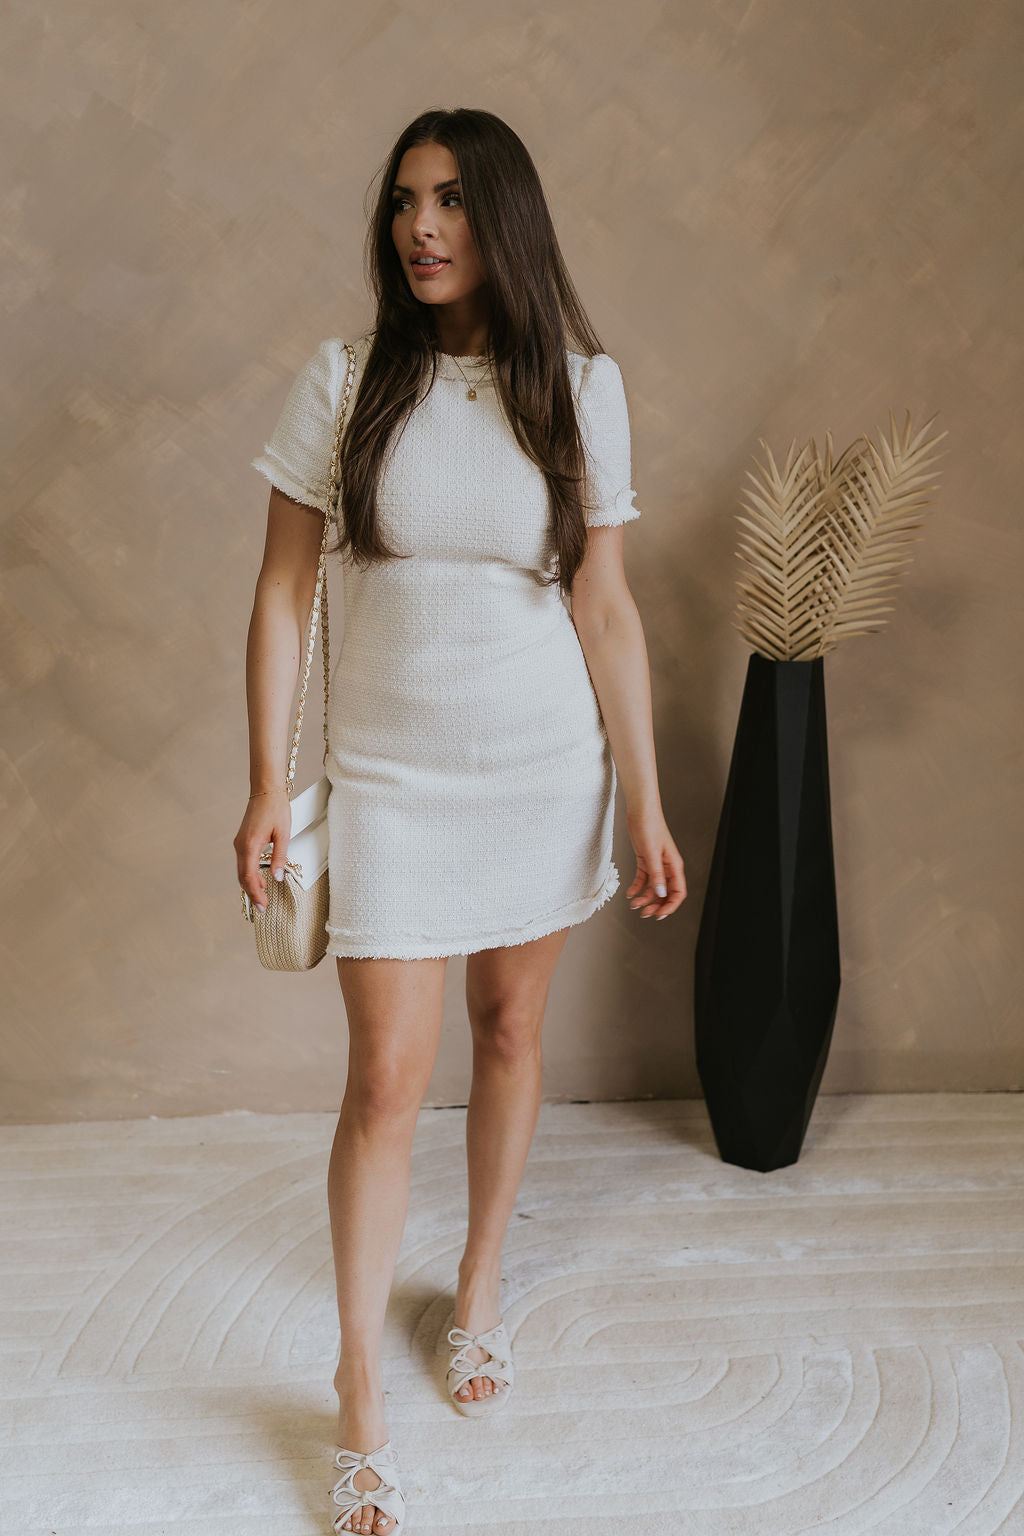 Full body front view of 5'5" female model wearing the Demi Tweed Short Sleeve Mini Dress in Off White that has off white tweed fabric, short sleeves with puff shoulders, a high round neck, and back zipper.